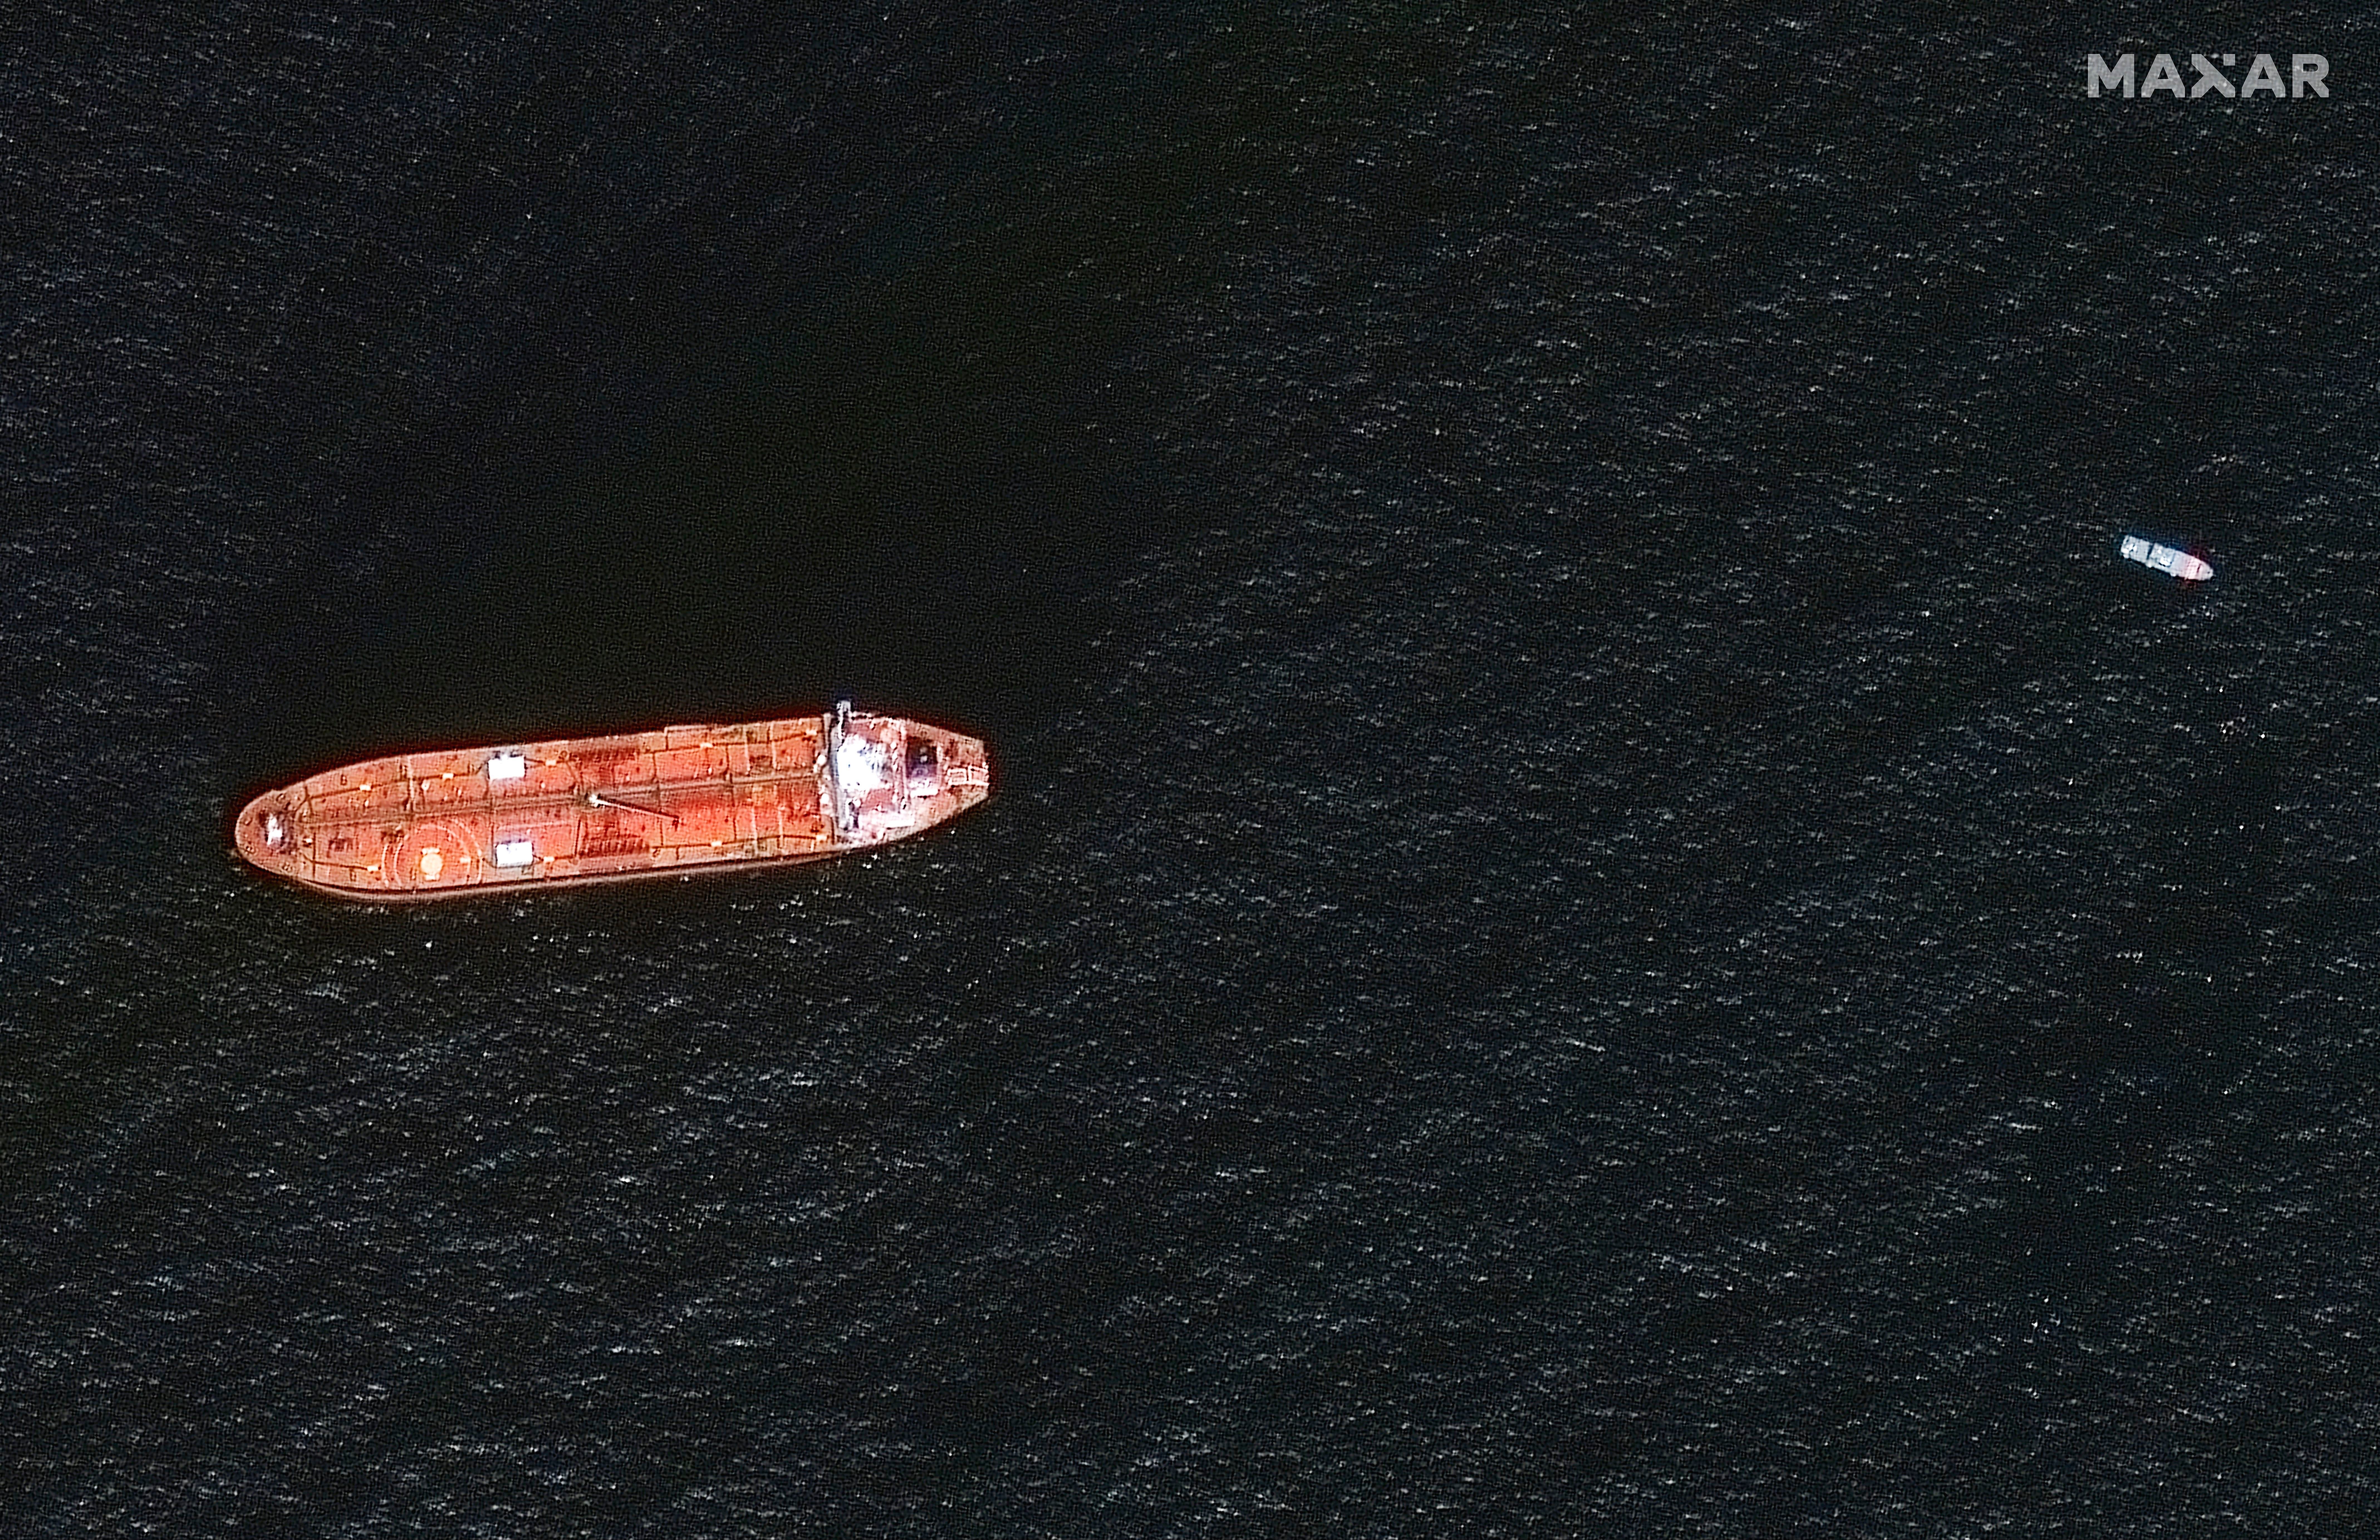 A drone hit the Mercer Street oil tanker on July 29, killing British and Romanian crew members